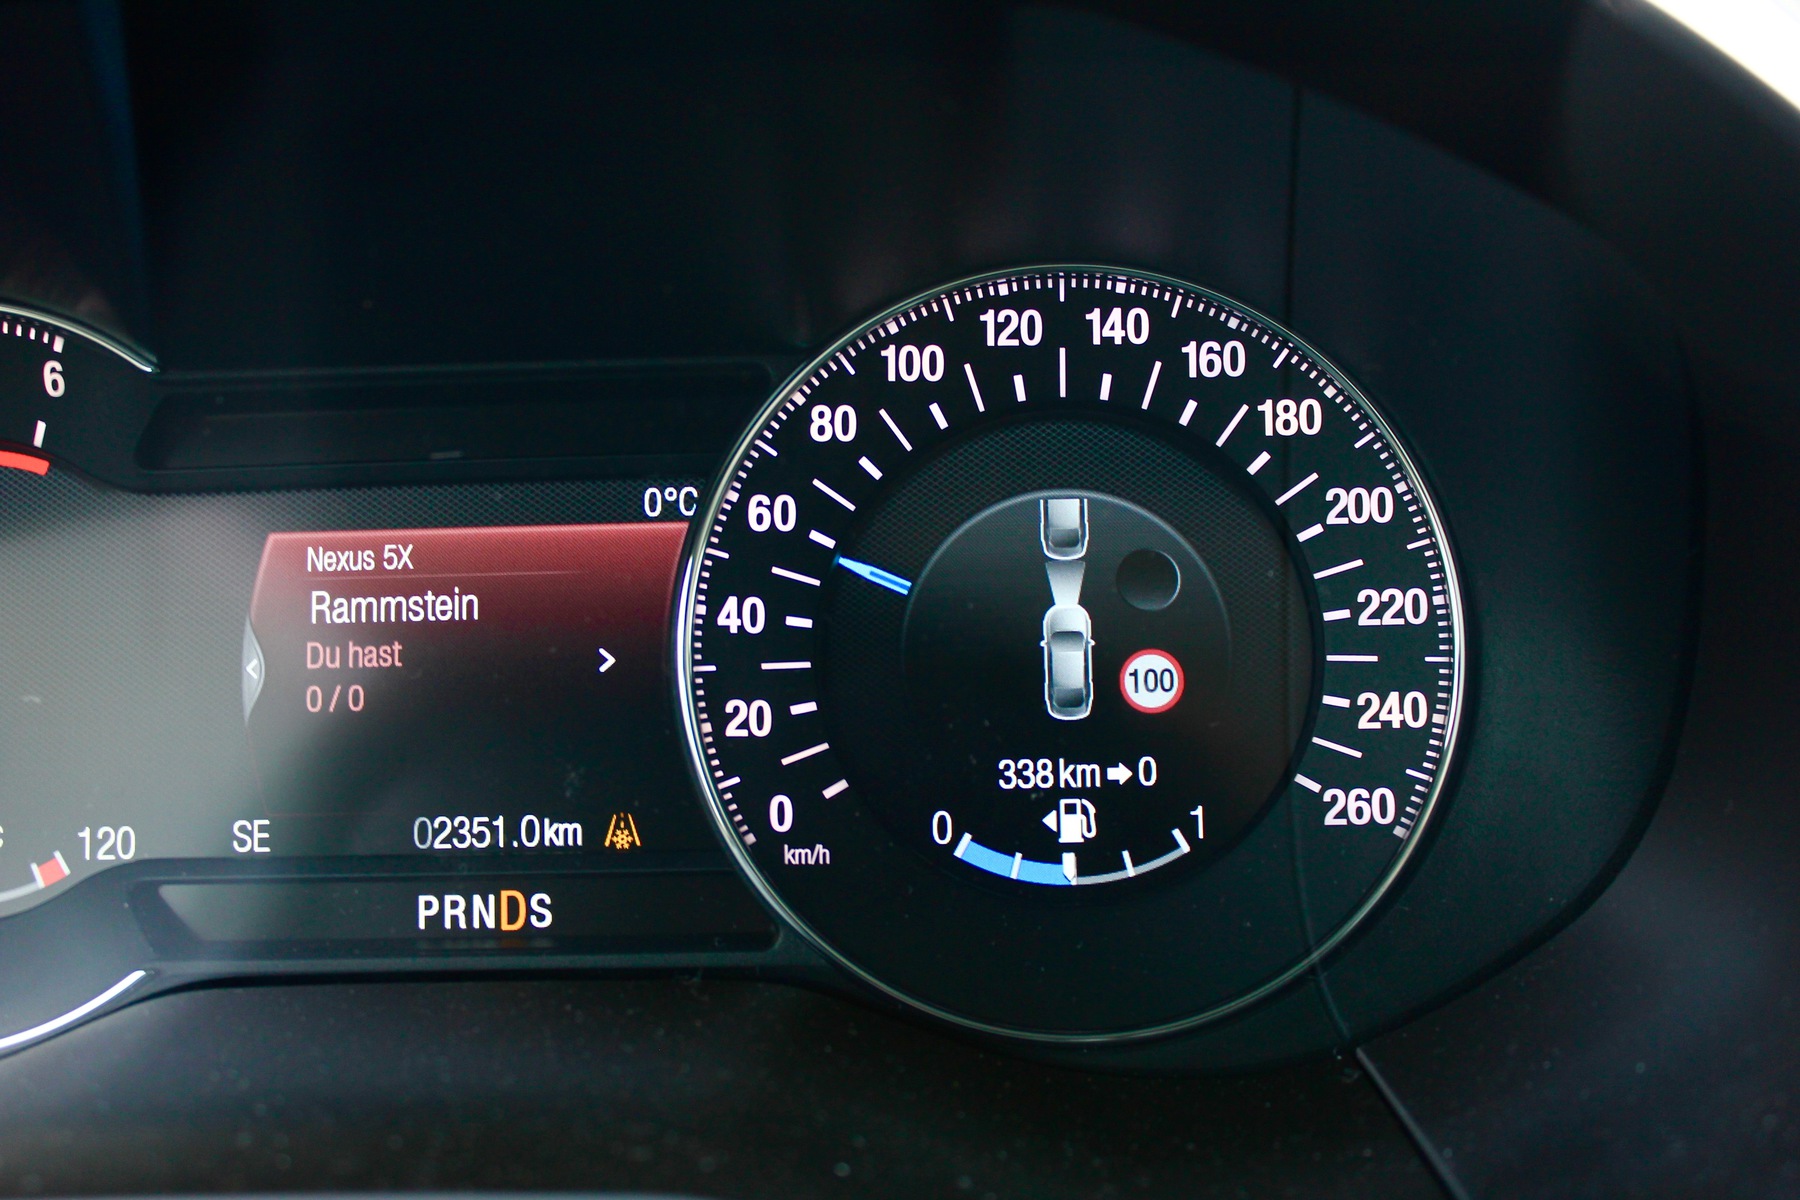 Ford Edge displays the speed limit in the dashboard